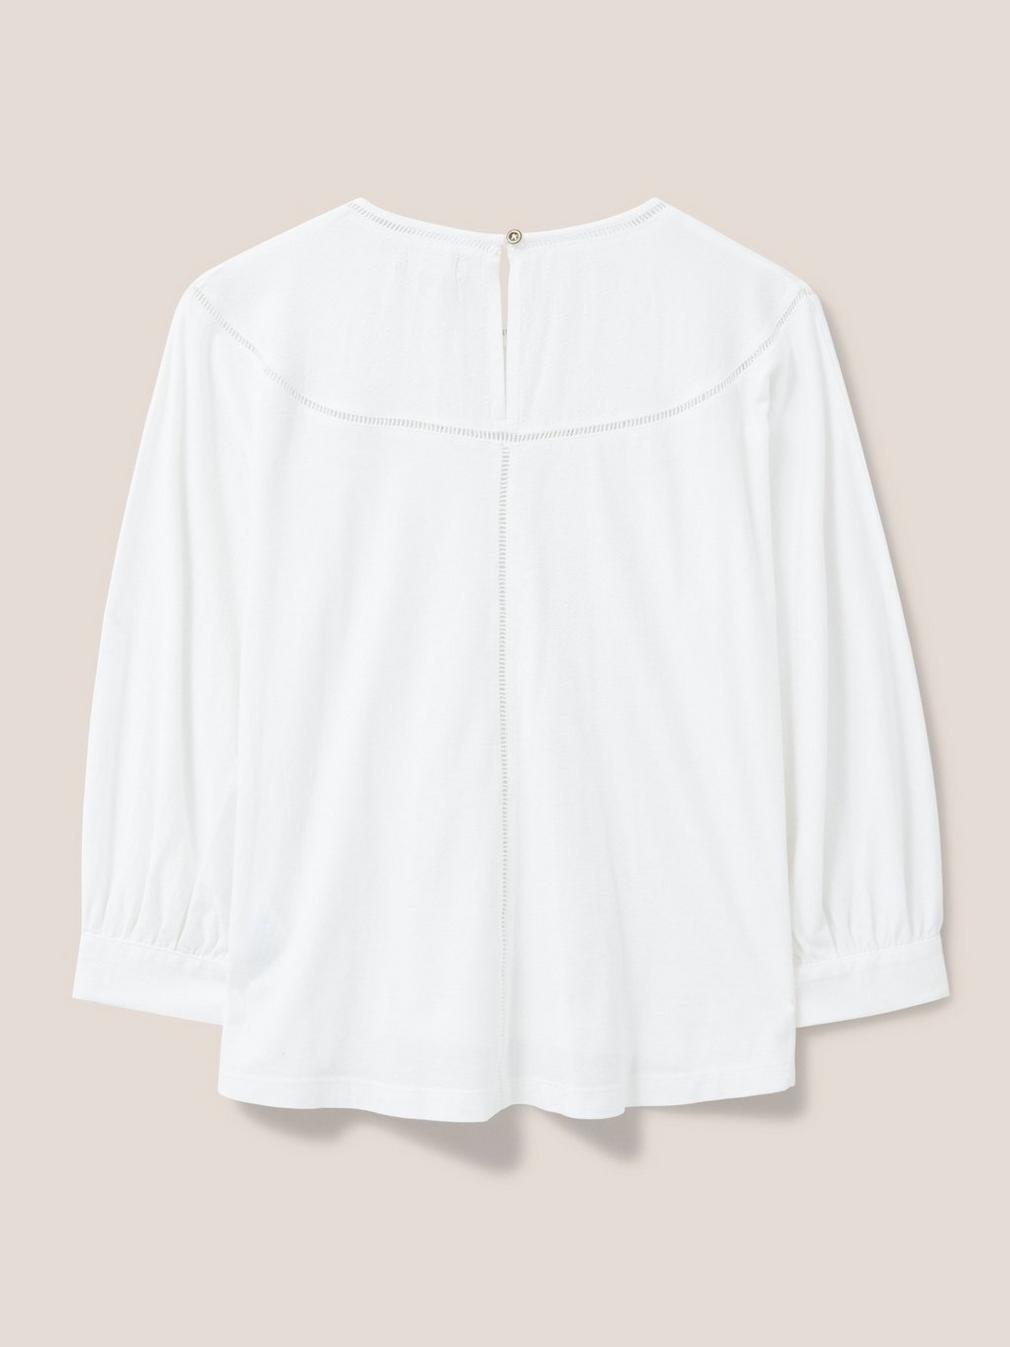 MOLLIE JERSEY MIX TOP in BRIL WHITE - FLAT BACK